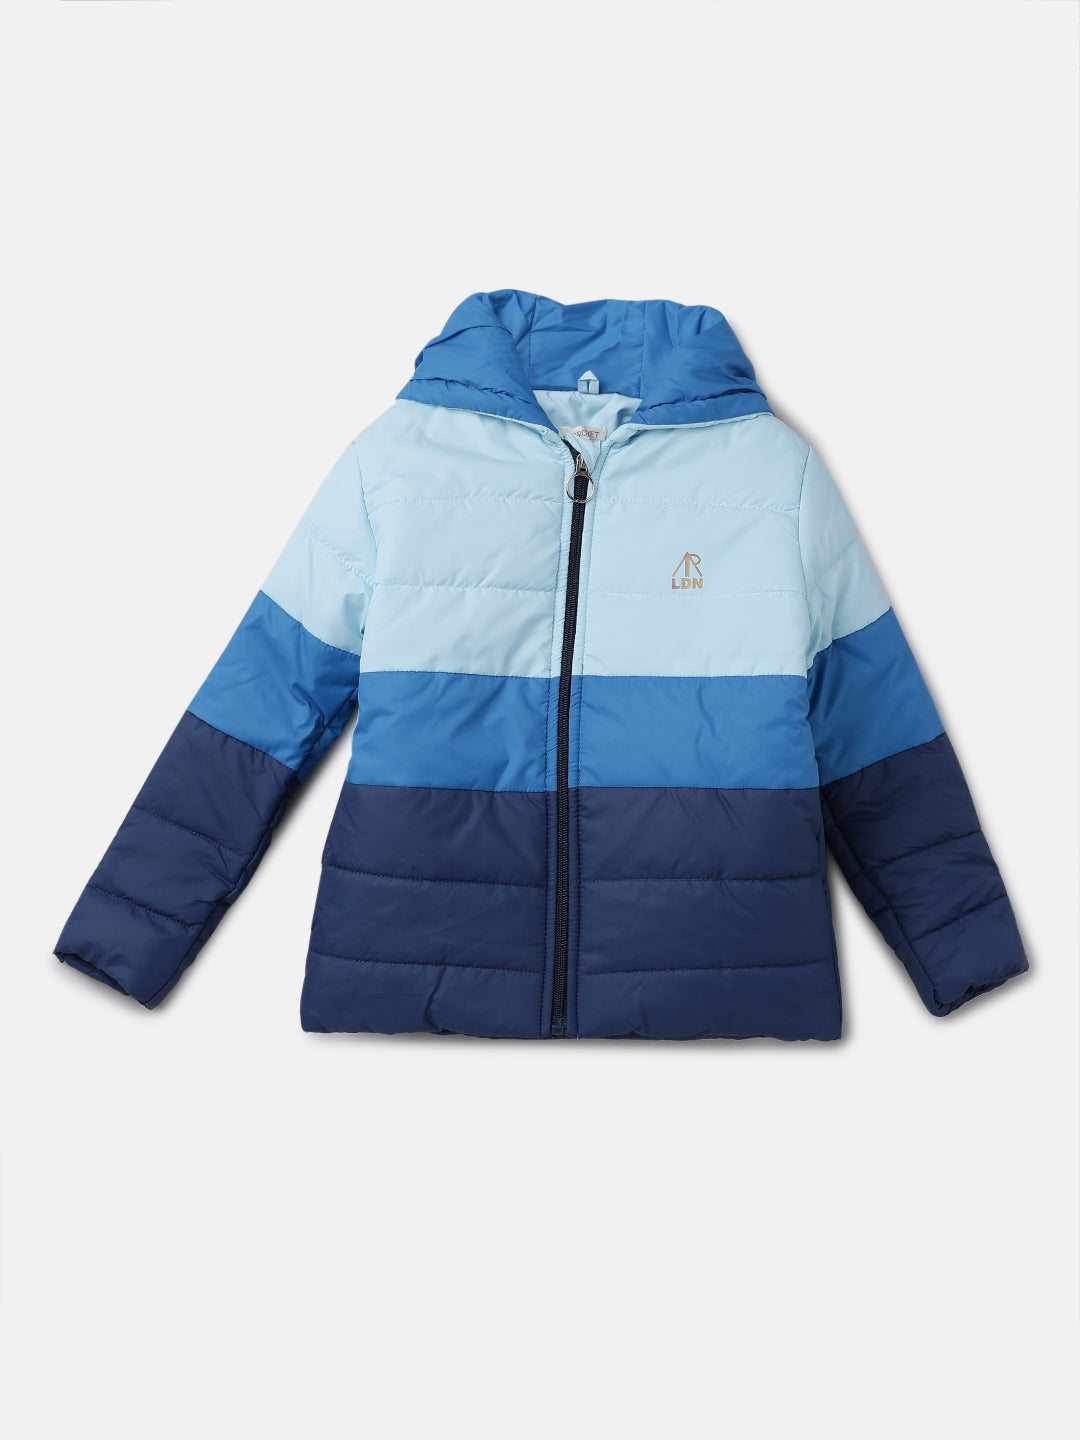 Girls Colour Blocked Puffa Jacket Blue with Hood